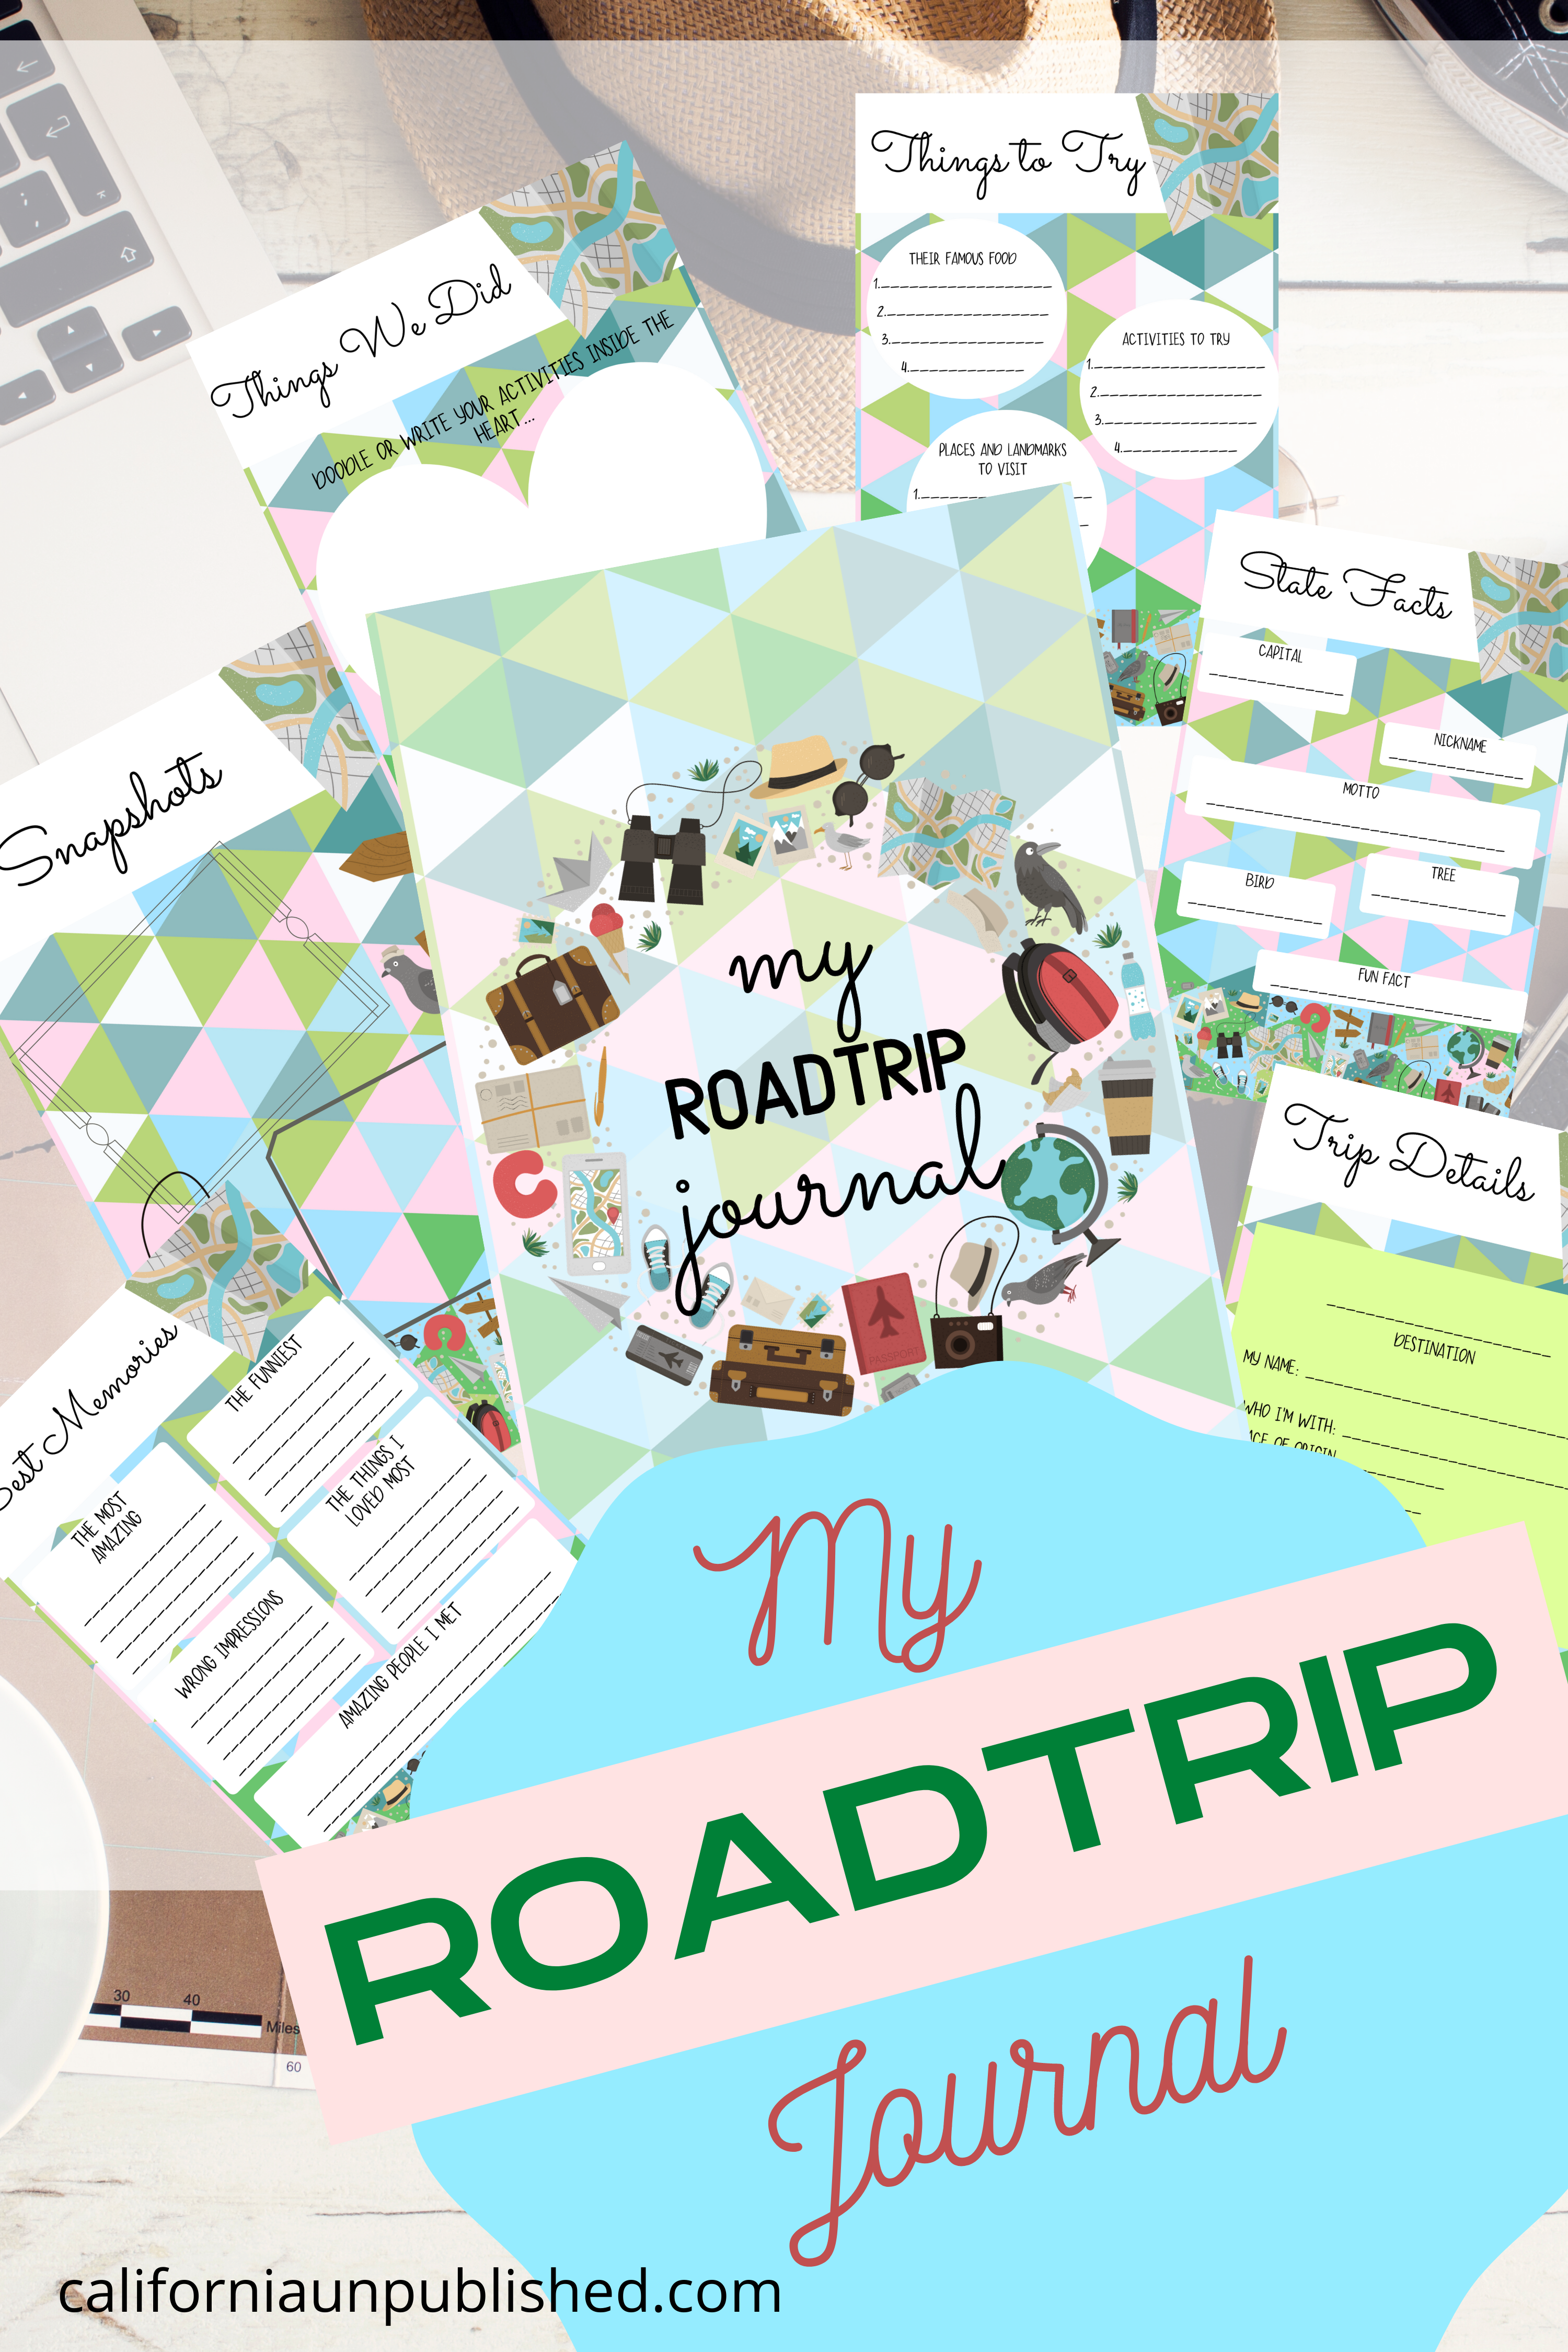 Free Printable Road Trip Games for Kids: Keep Your Little Ones Entertained  on Long Drives - California Unpublished